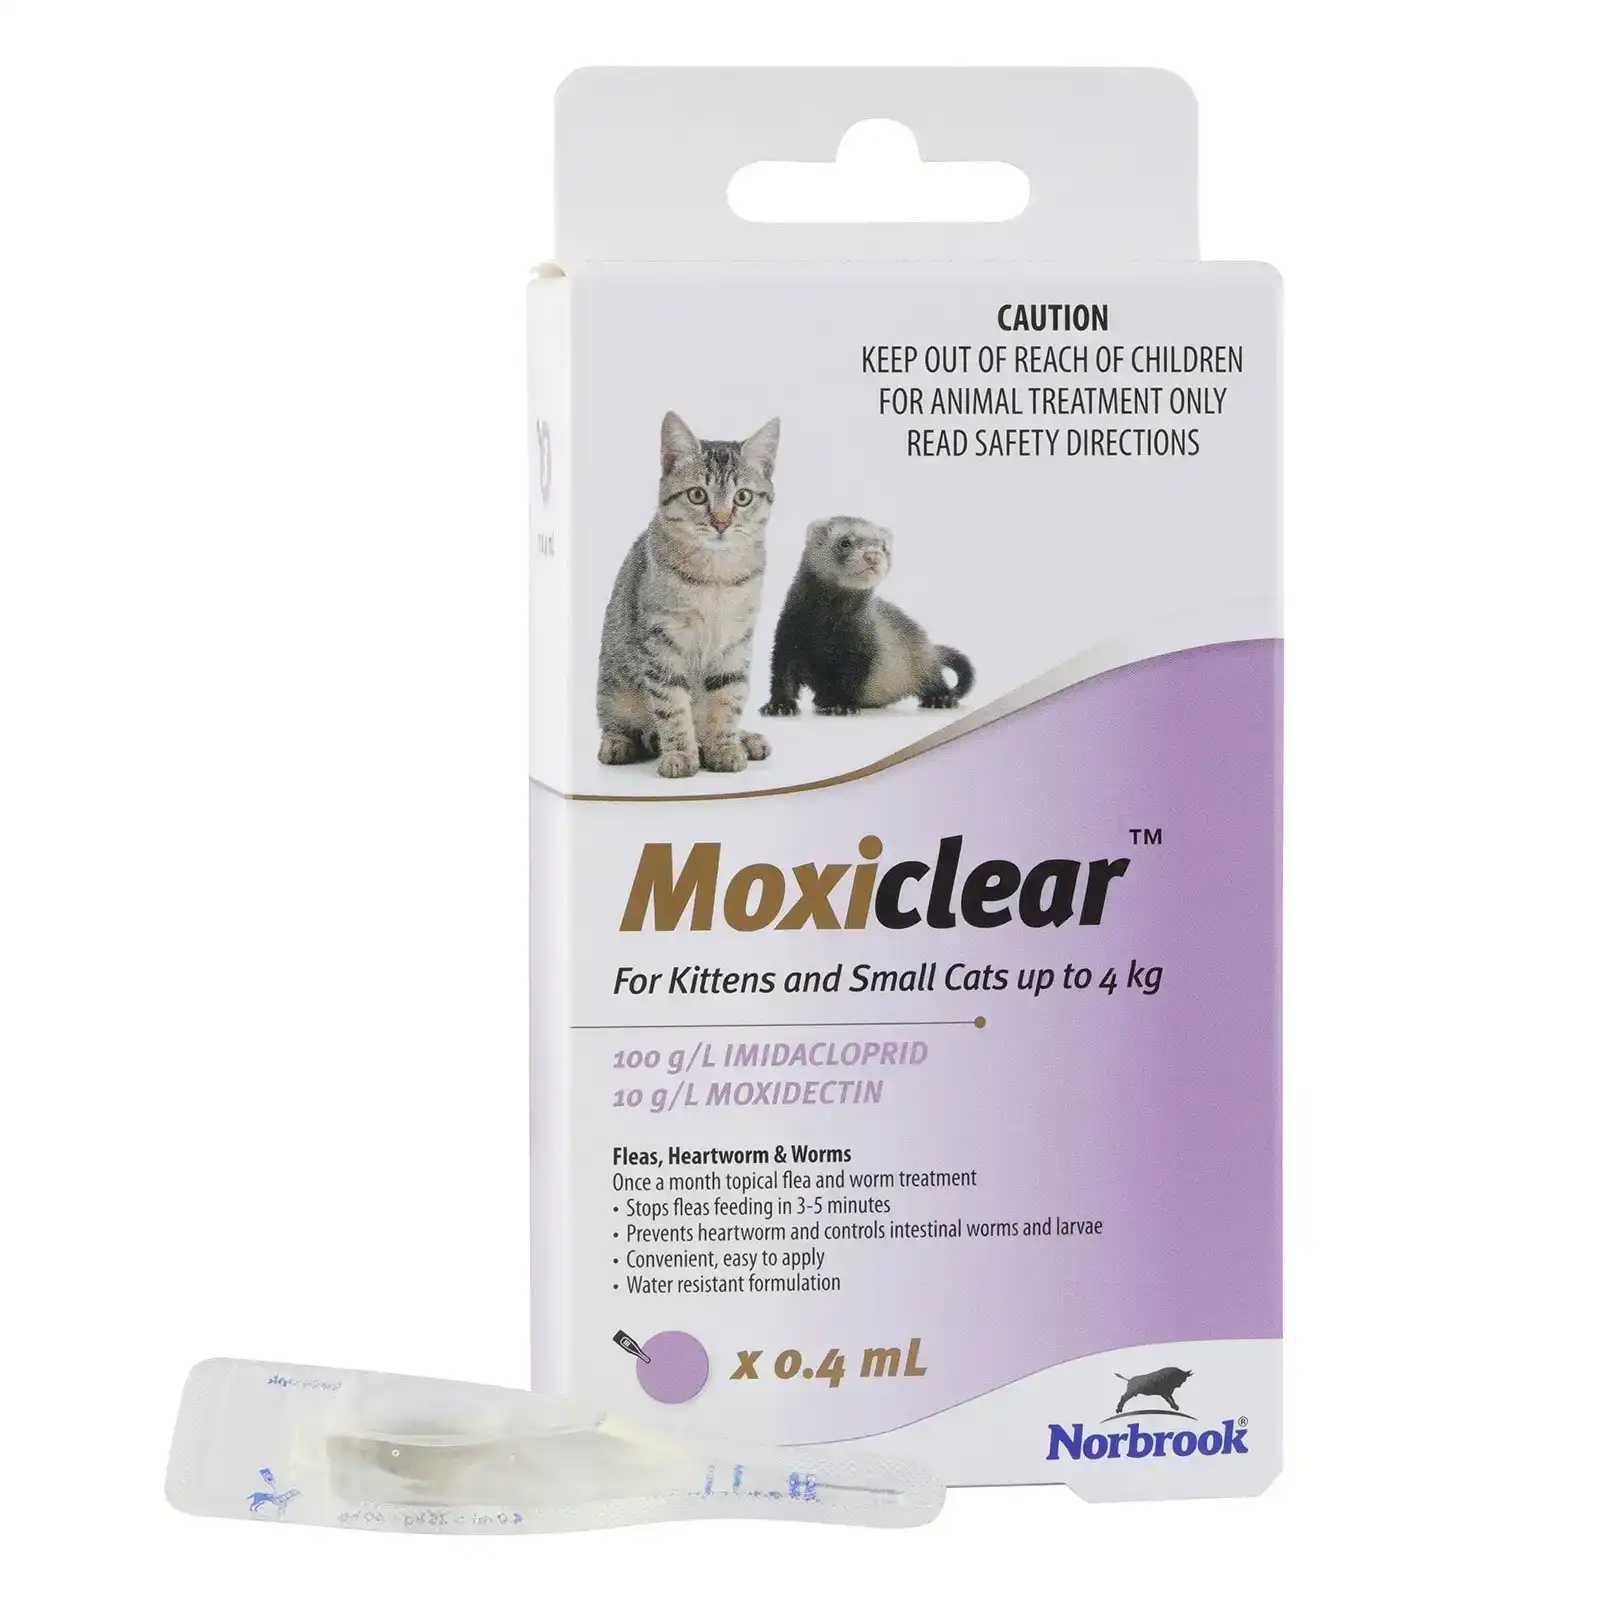 Moxiclear for Kittens and Small Cats Up to 4 Kg (PURPLE) 3 Pipettes